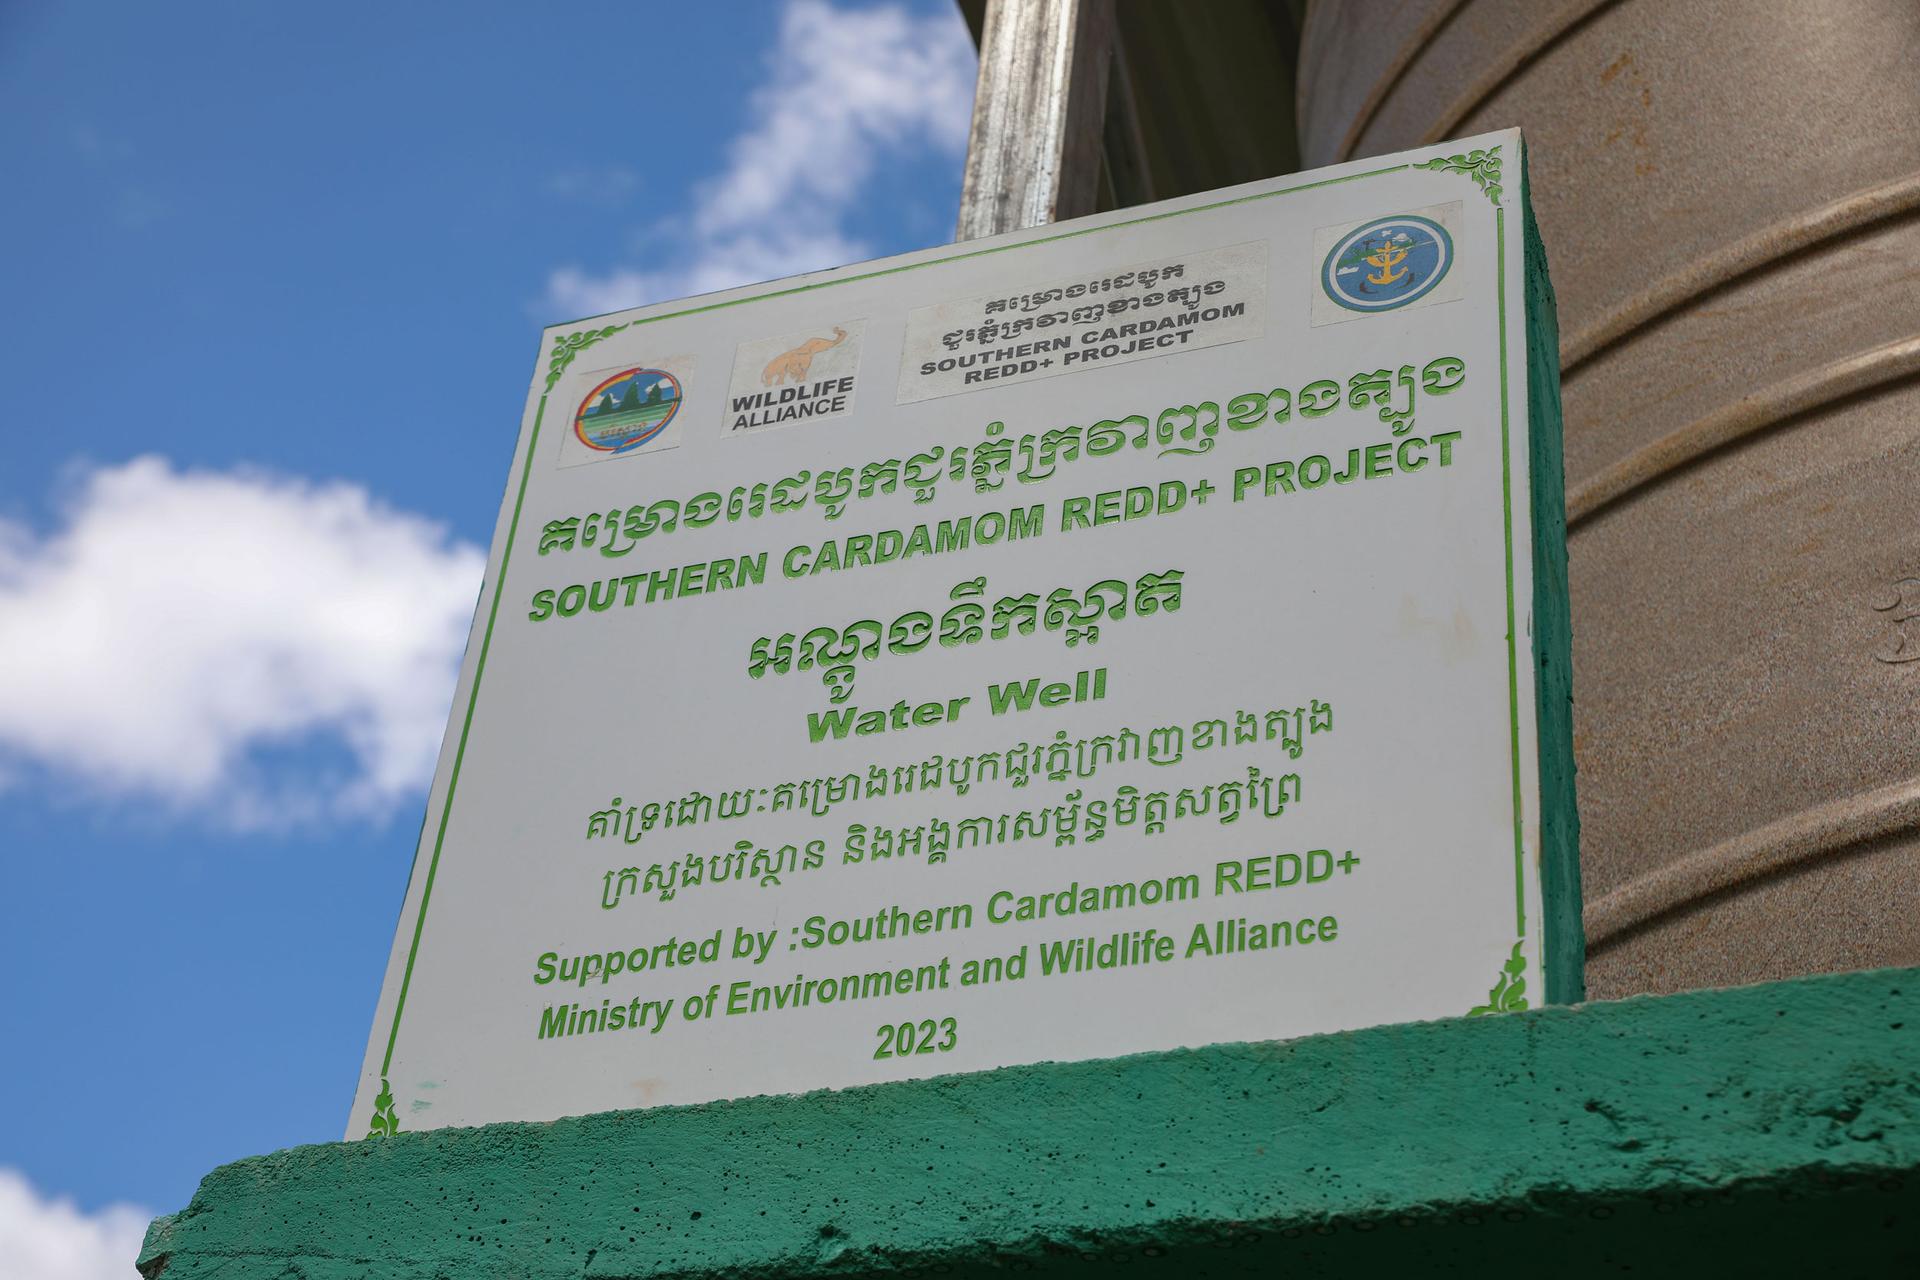 A sign in Chamnar village, the furthest community in Areng Valley, indicates that a new water tower was supported by the Southern Cardamom REDD+ project within the national park.